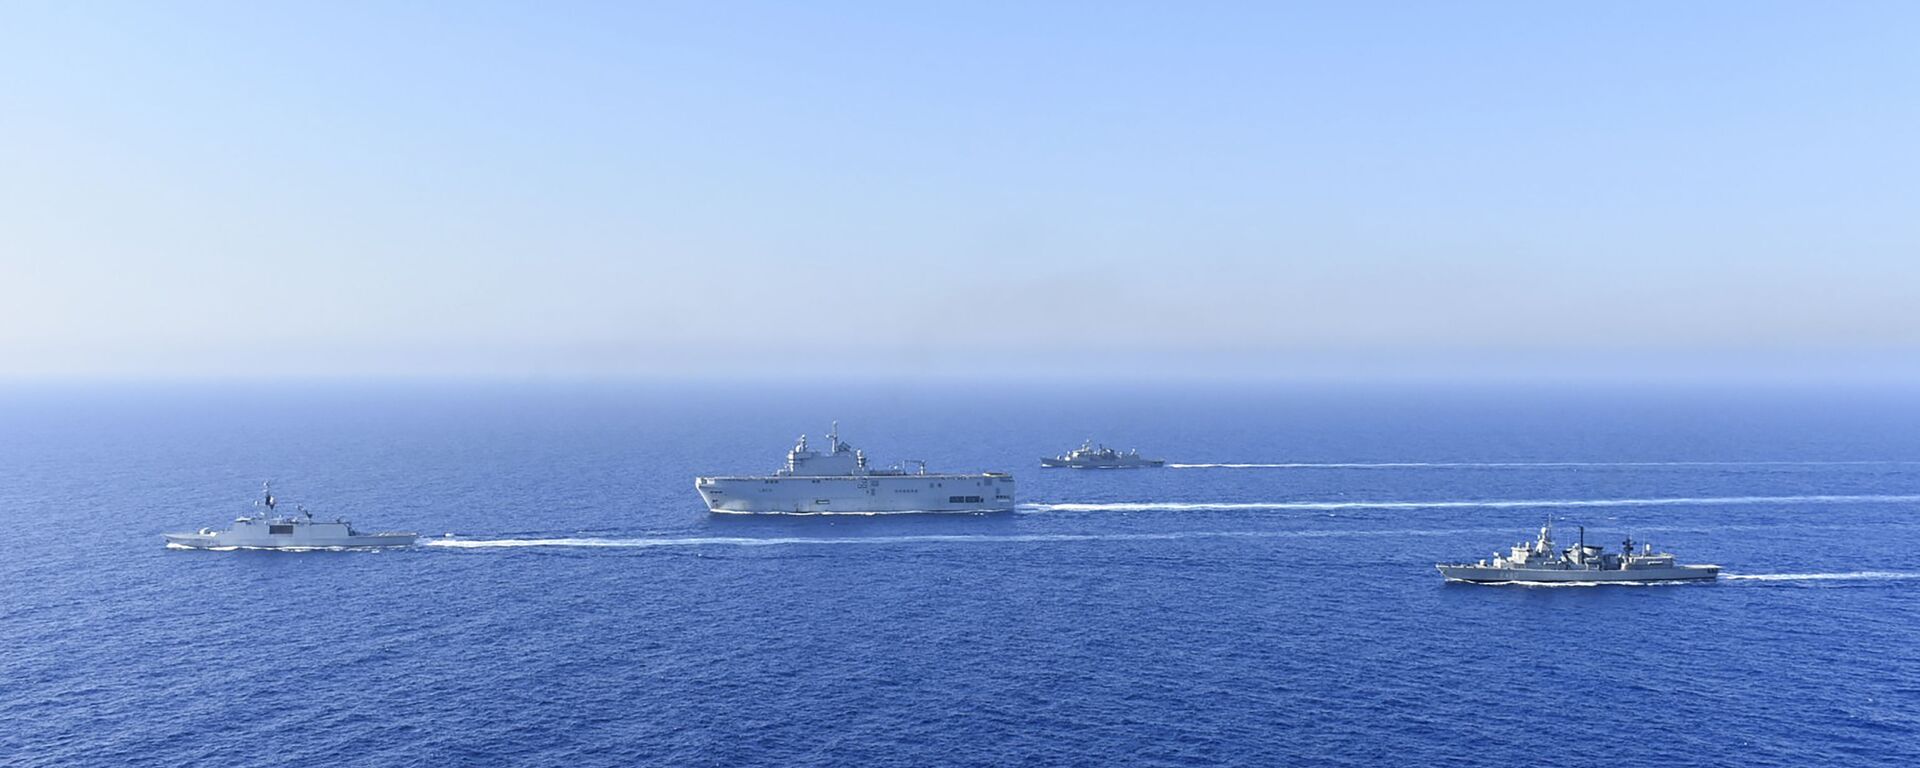 In this photo provided by the Greek National Defence, a French Tonnerre helicopter carrier, center, and French Lafayette frigate, left, are escorted by Greek and French military vessels during a maritime exercise in the Eastern Mediterranean, Thursday, Aug. 13, 2020 - Sputnik International, 1920, 11.09.2020